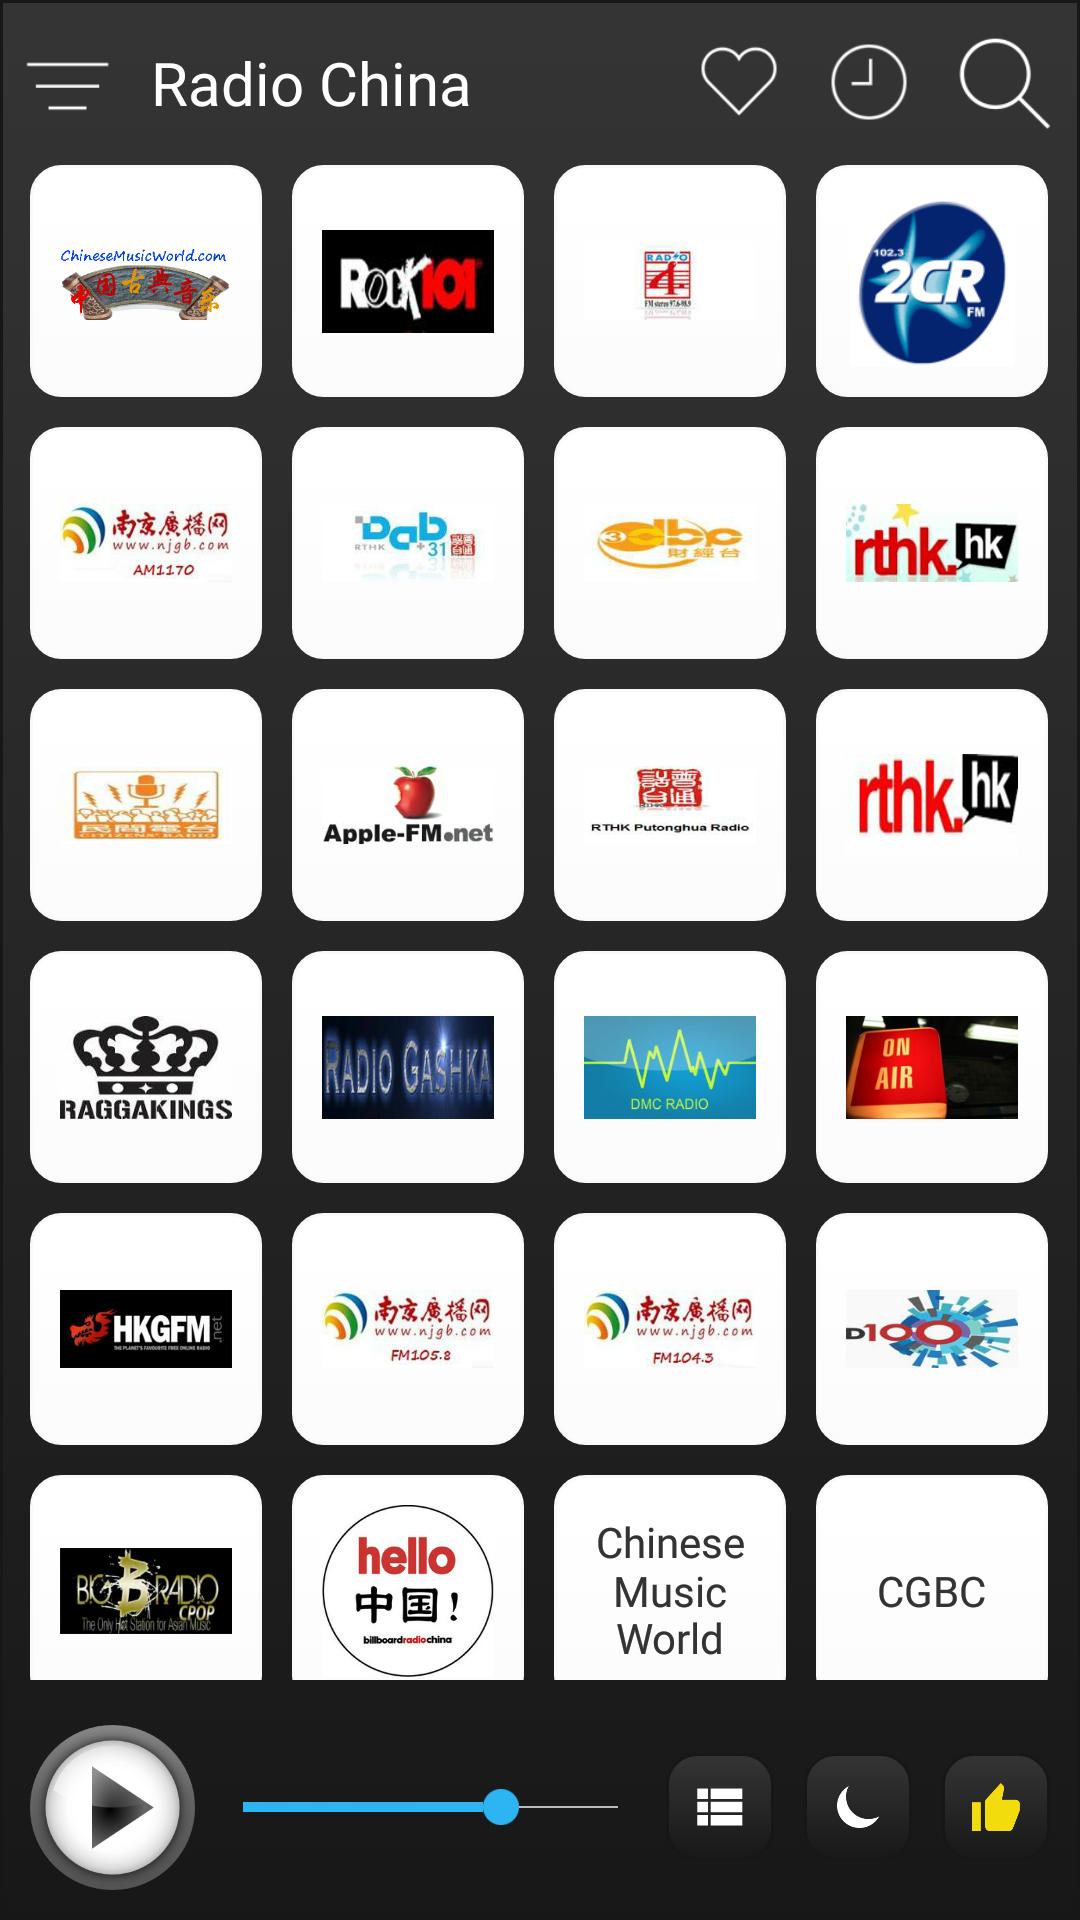 China Radio Stations Online - Chinese FM AM Music for Android - APK Download